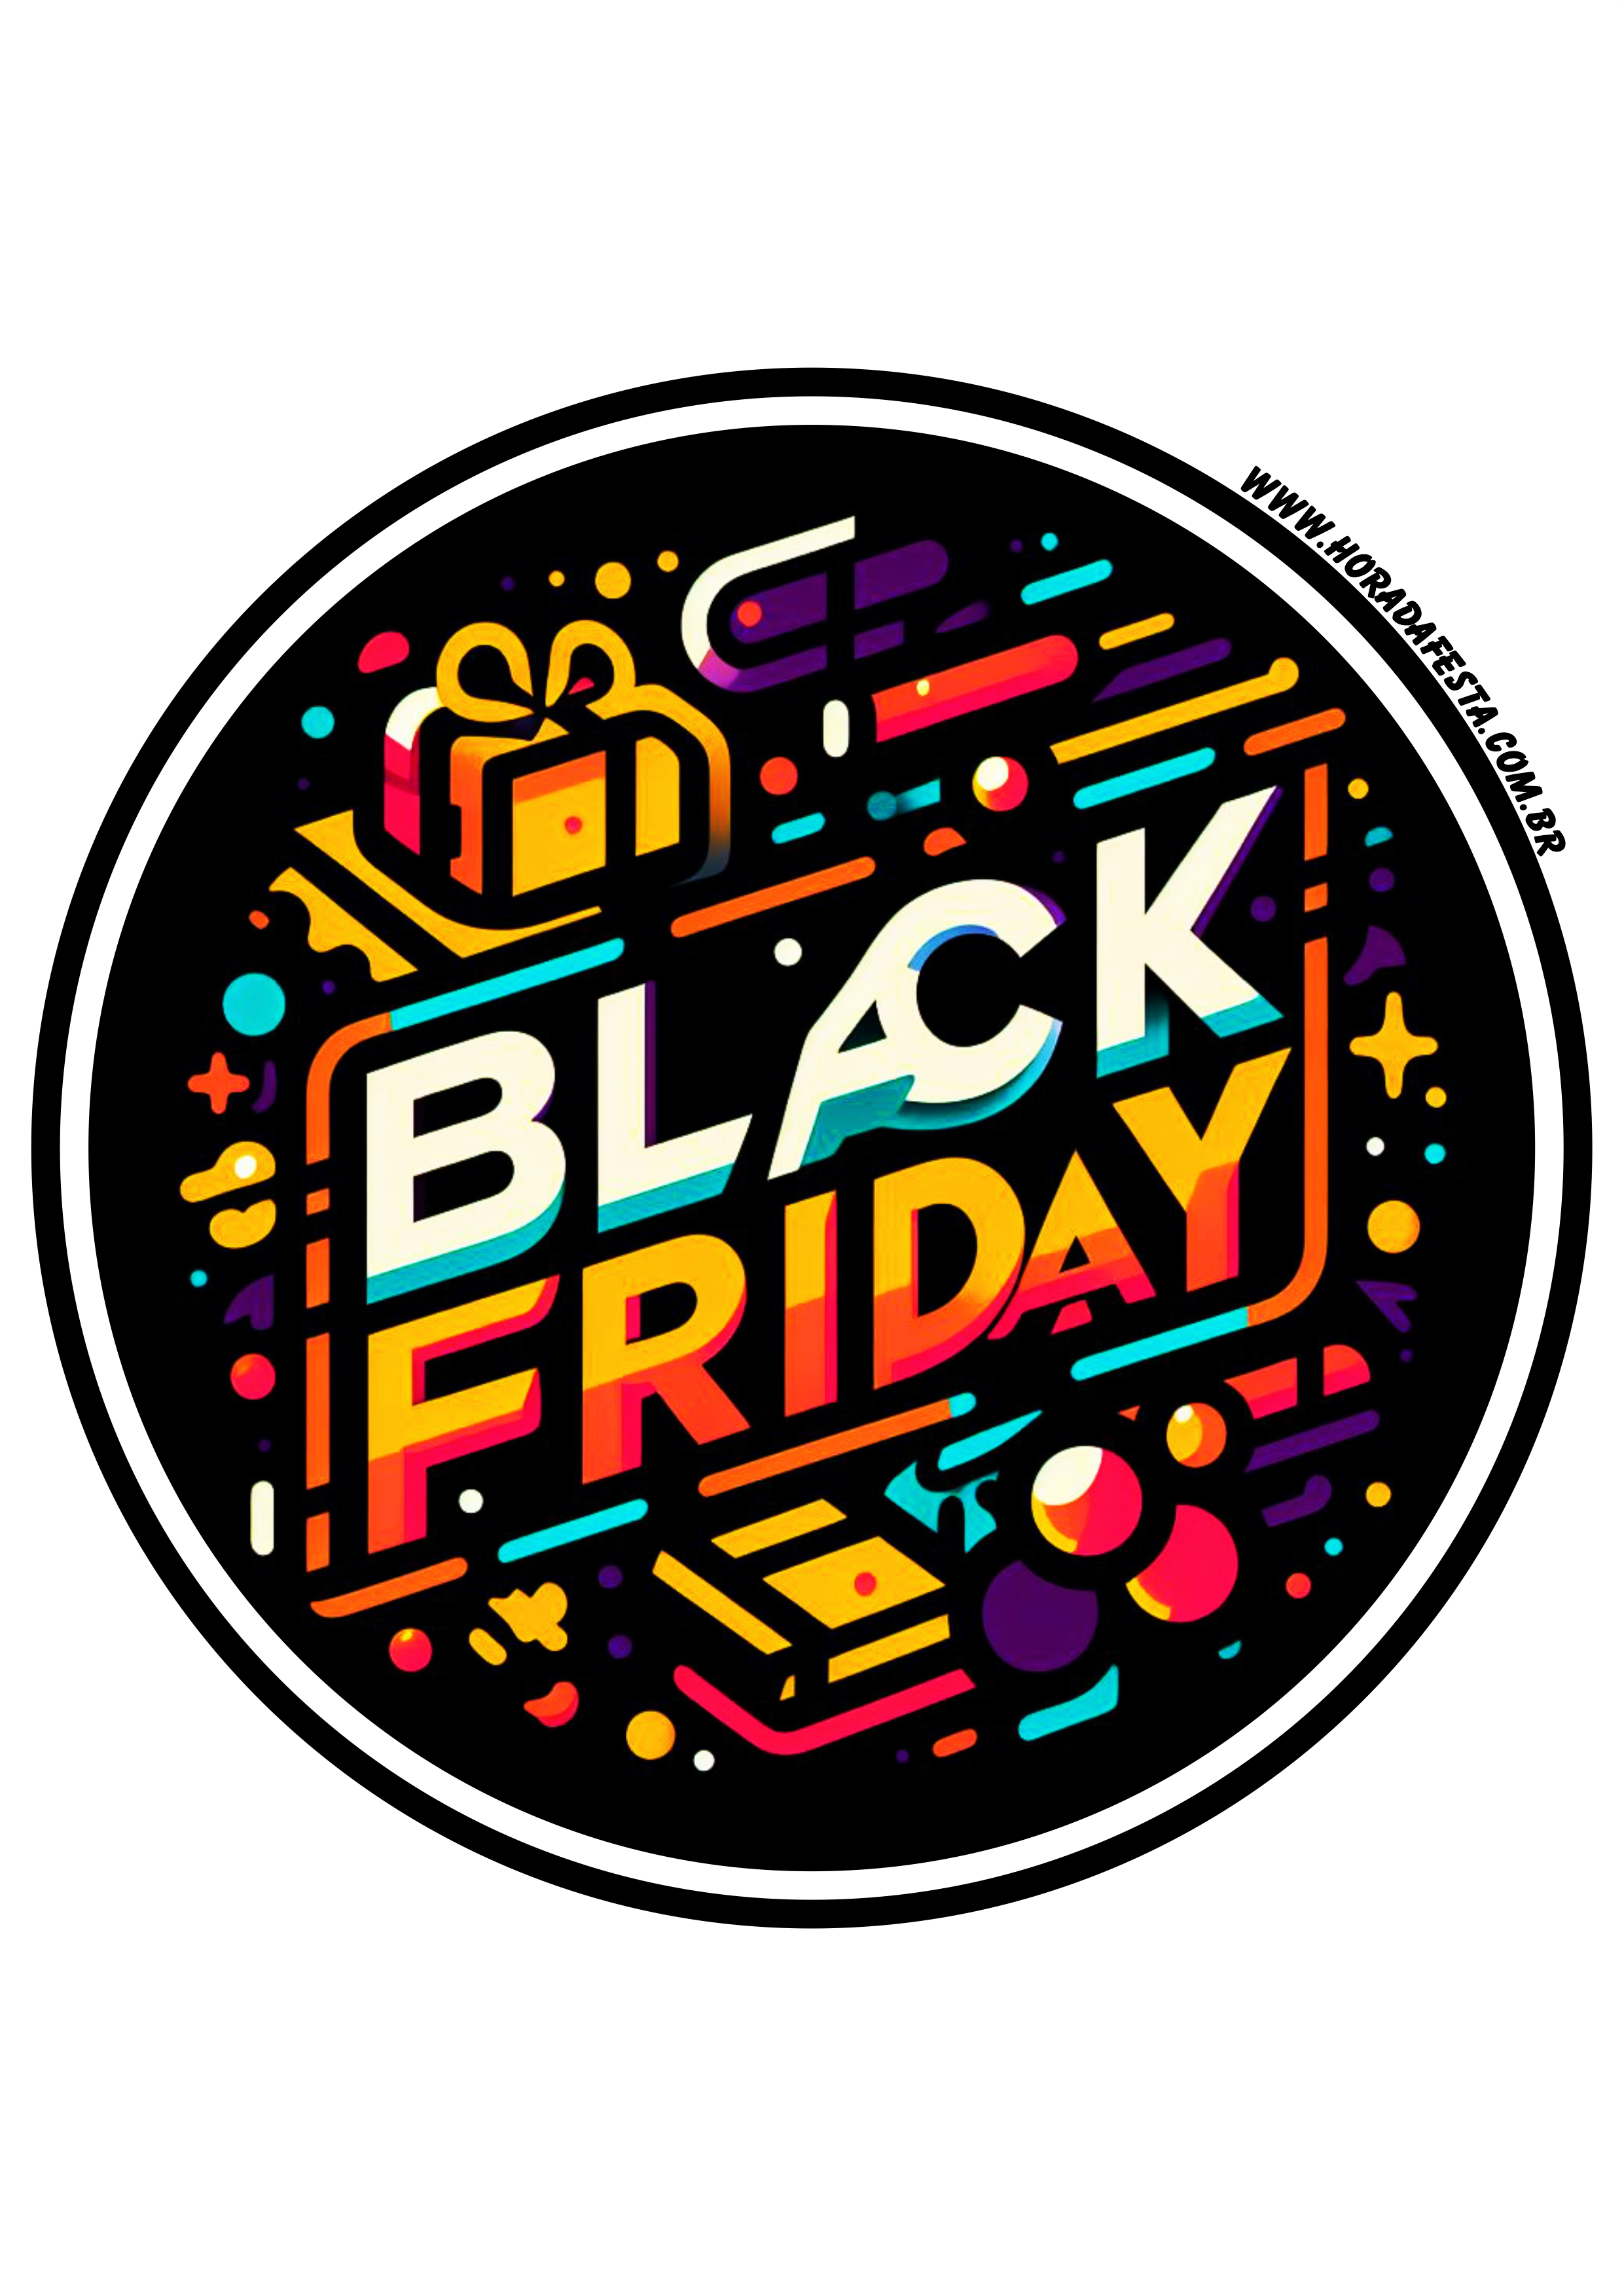 Black Friday adesivo redondo tag sticker painel artes gráficas png